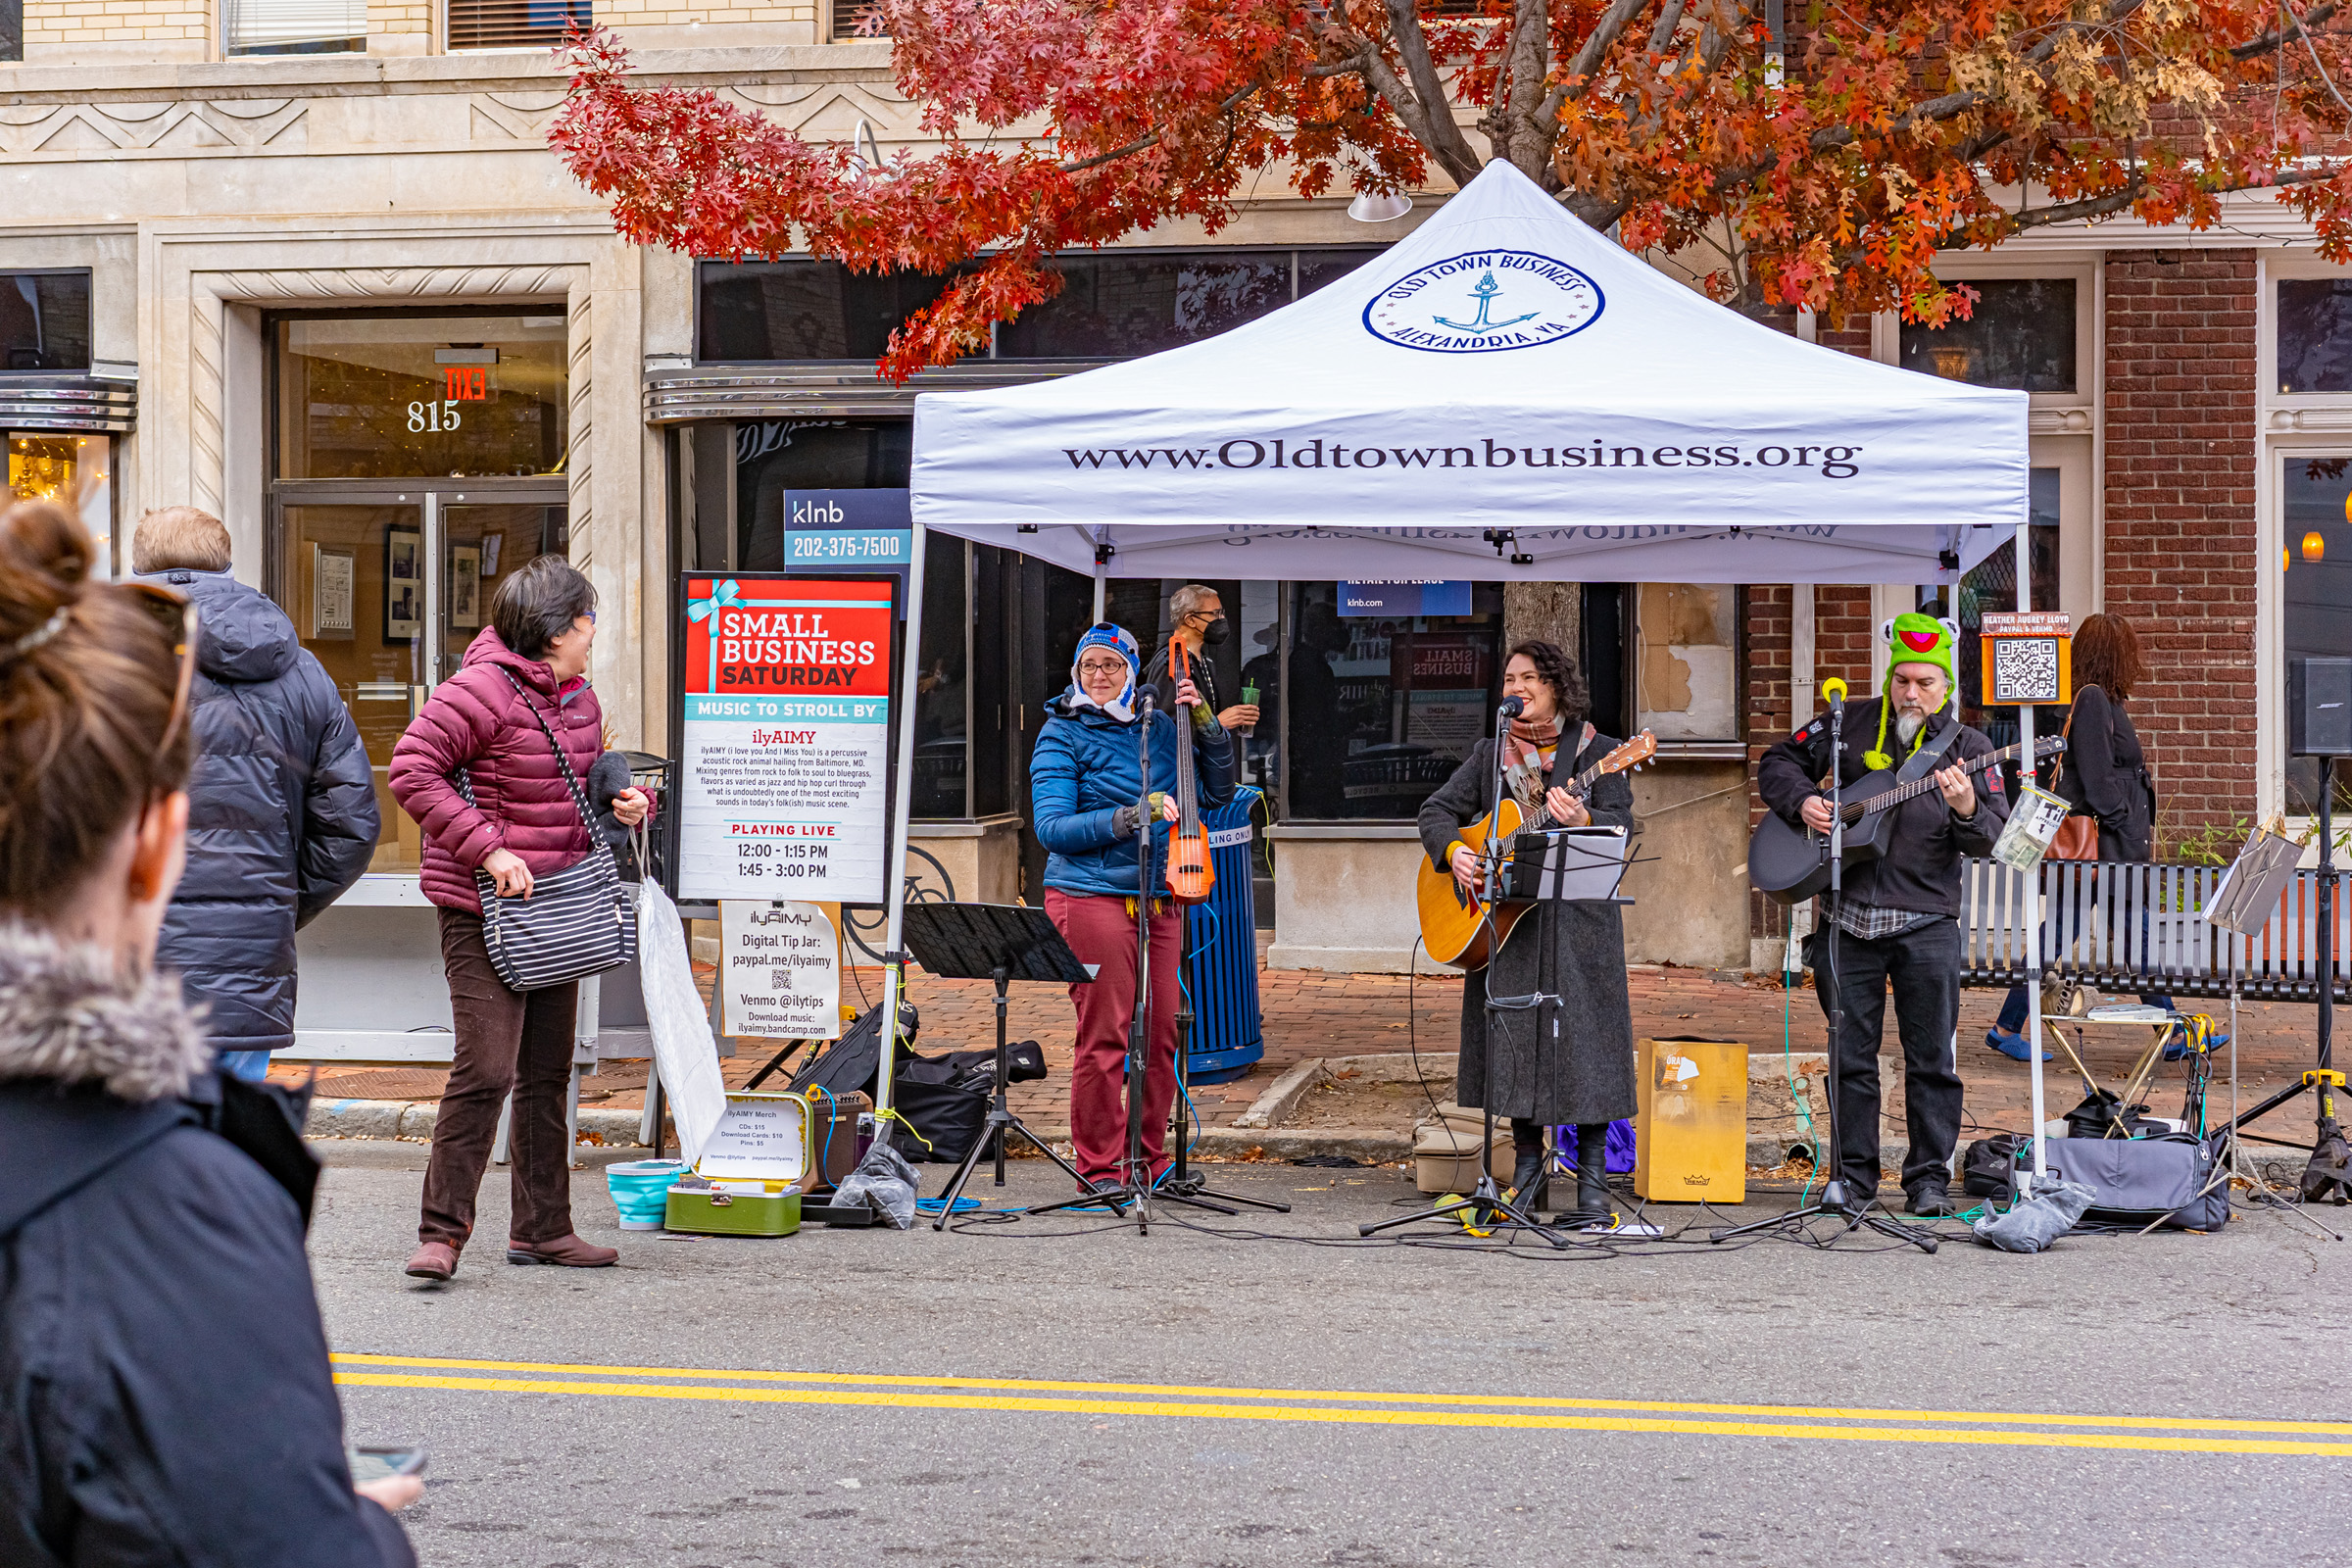 Band performs under an Old Town Business tent for Small Business Saturday.